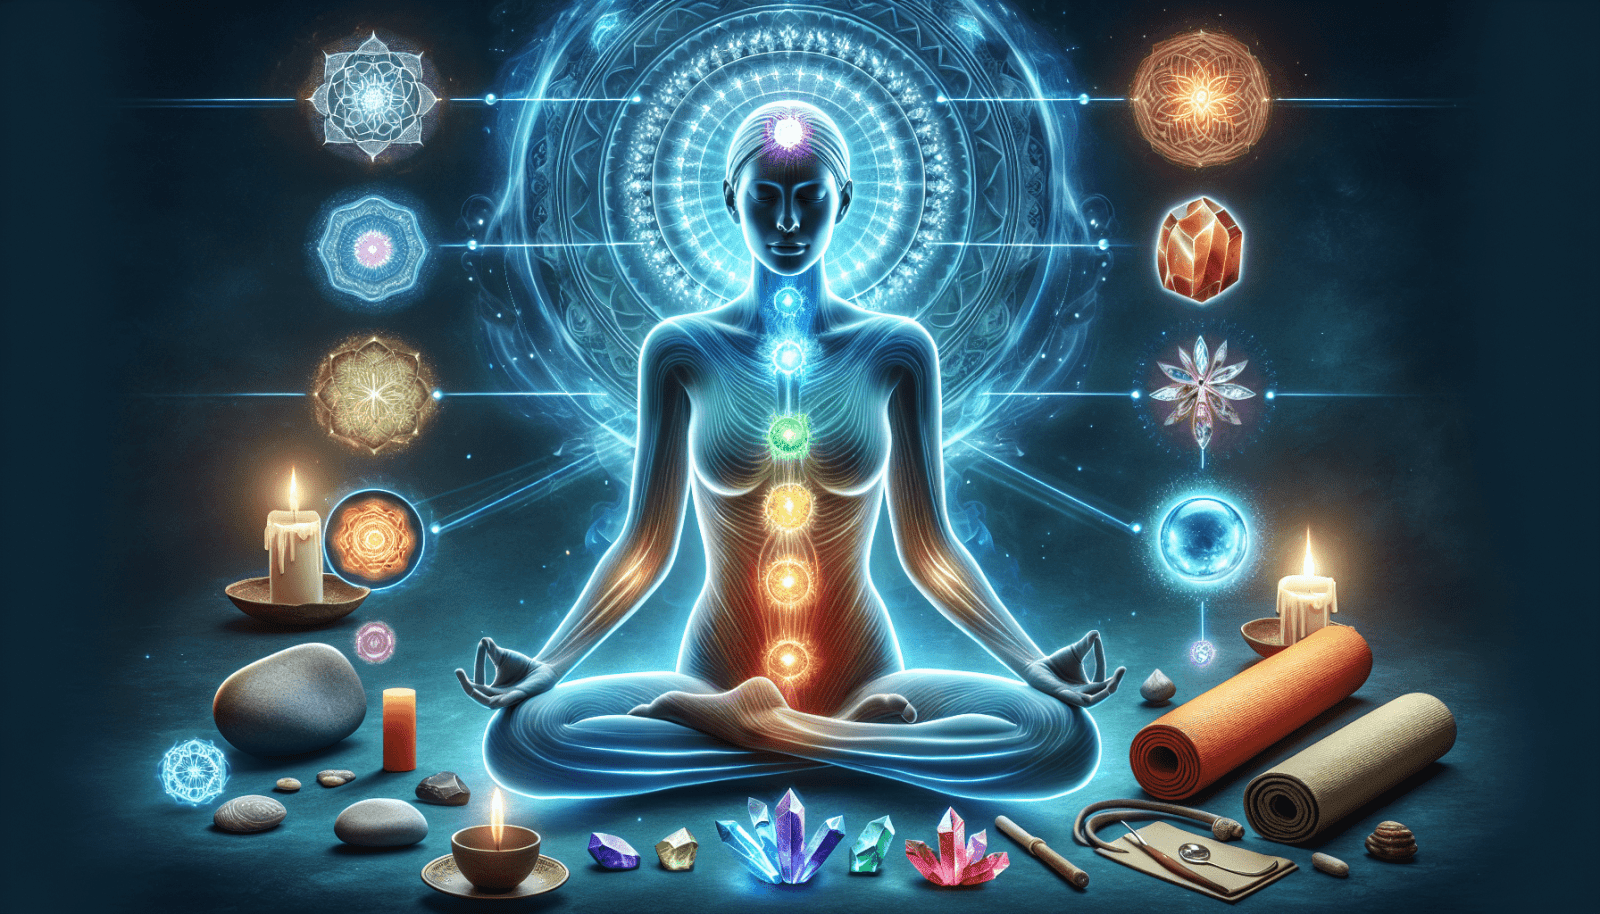 Digital artwork of a meditating figure with seven colored chakra points aligned vertically along the body, surrounded by mystical symbols, crystals, candles, and yoga equipment against a cosmic backdrop.